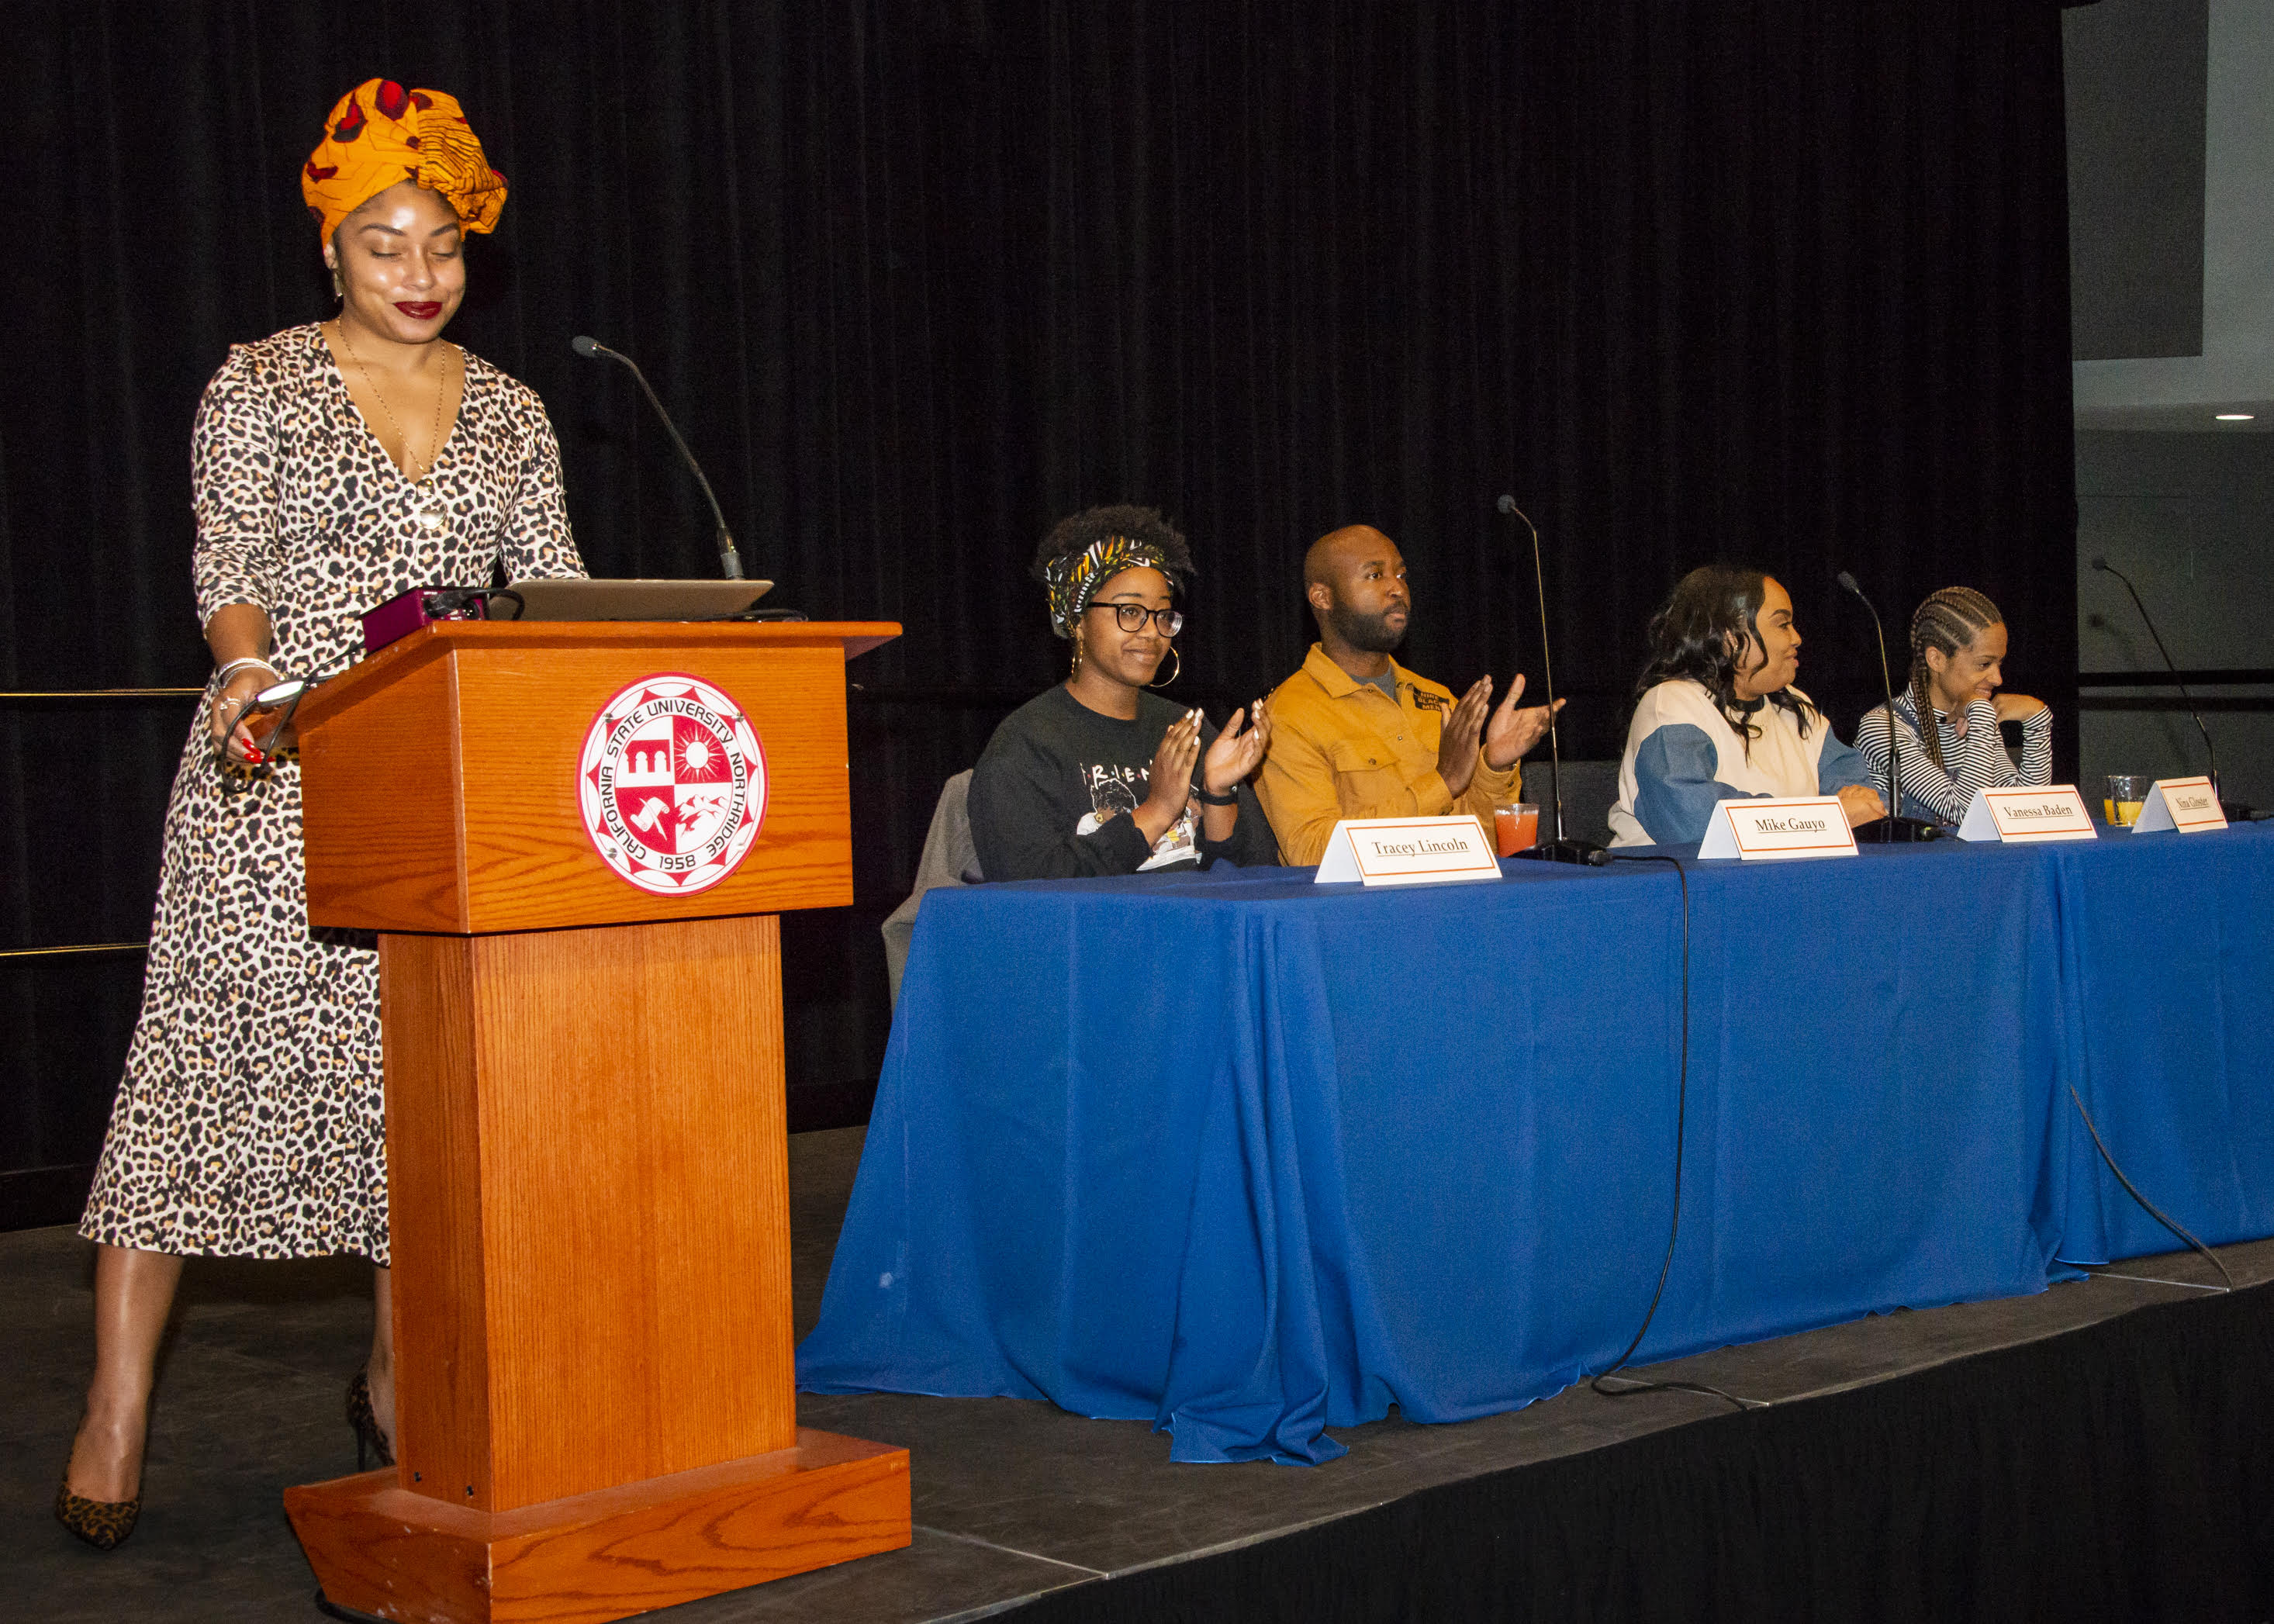 Professor Melanie Shaw and panelists Tracey Lincoln, Mike Gauyo, Vanessa Baden and Nina Gloster discuss the current status of black writers and black women in TV and film.